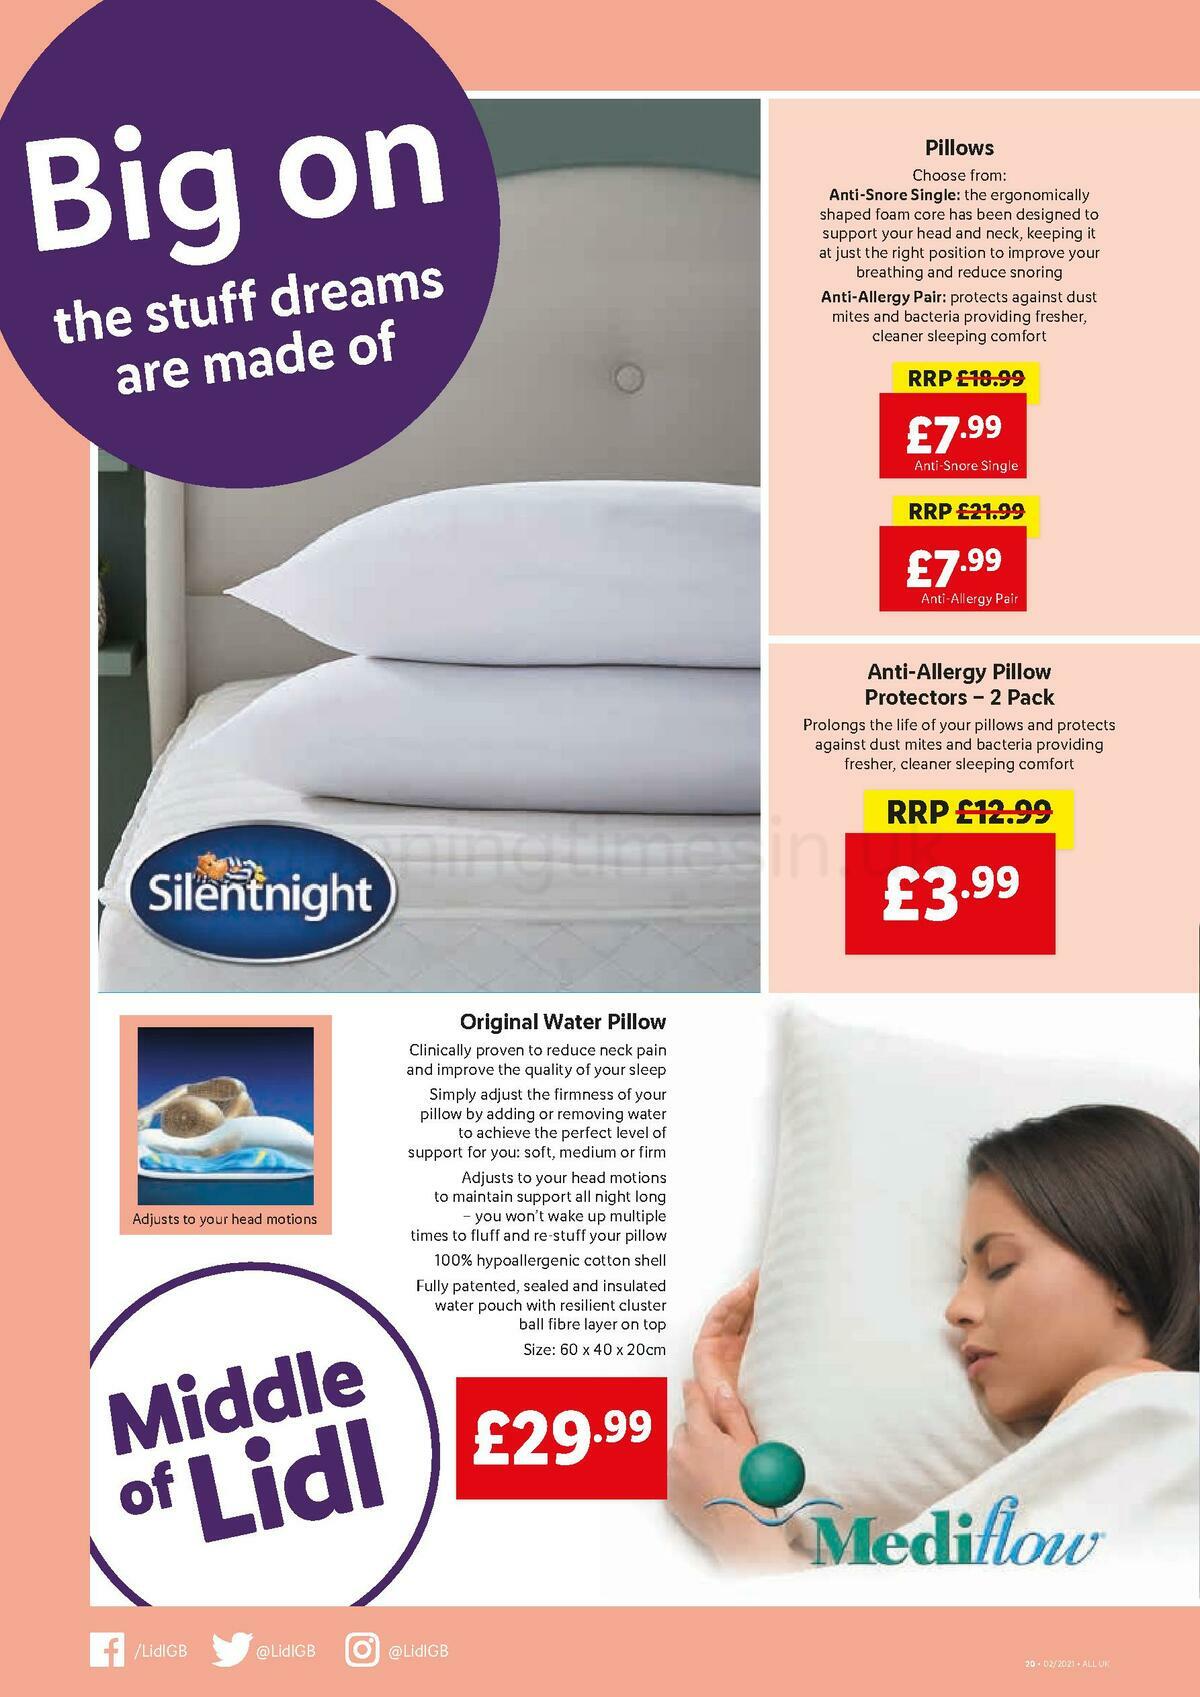 LIDL Offers from 14 January